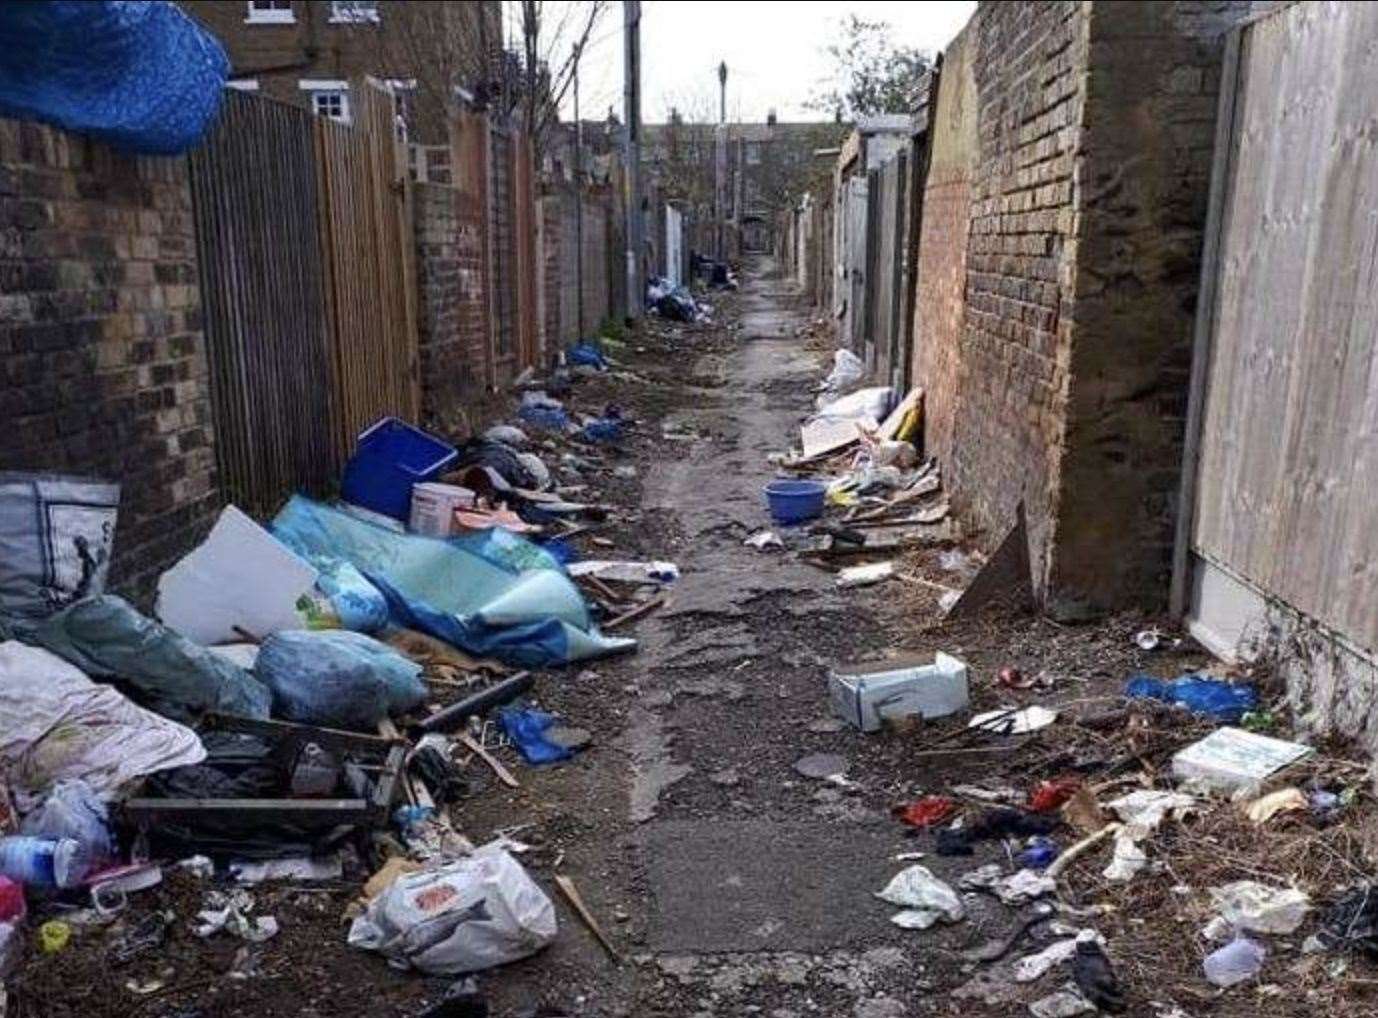 Fly tipping and waste strewn in alleyways between Elthelbert Road and Athelstan Road in Margate in 2019